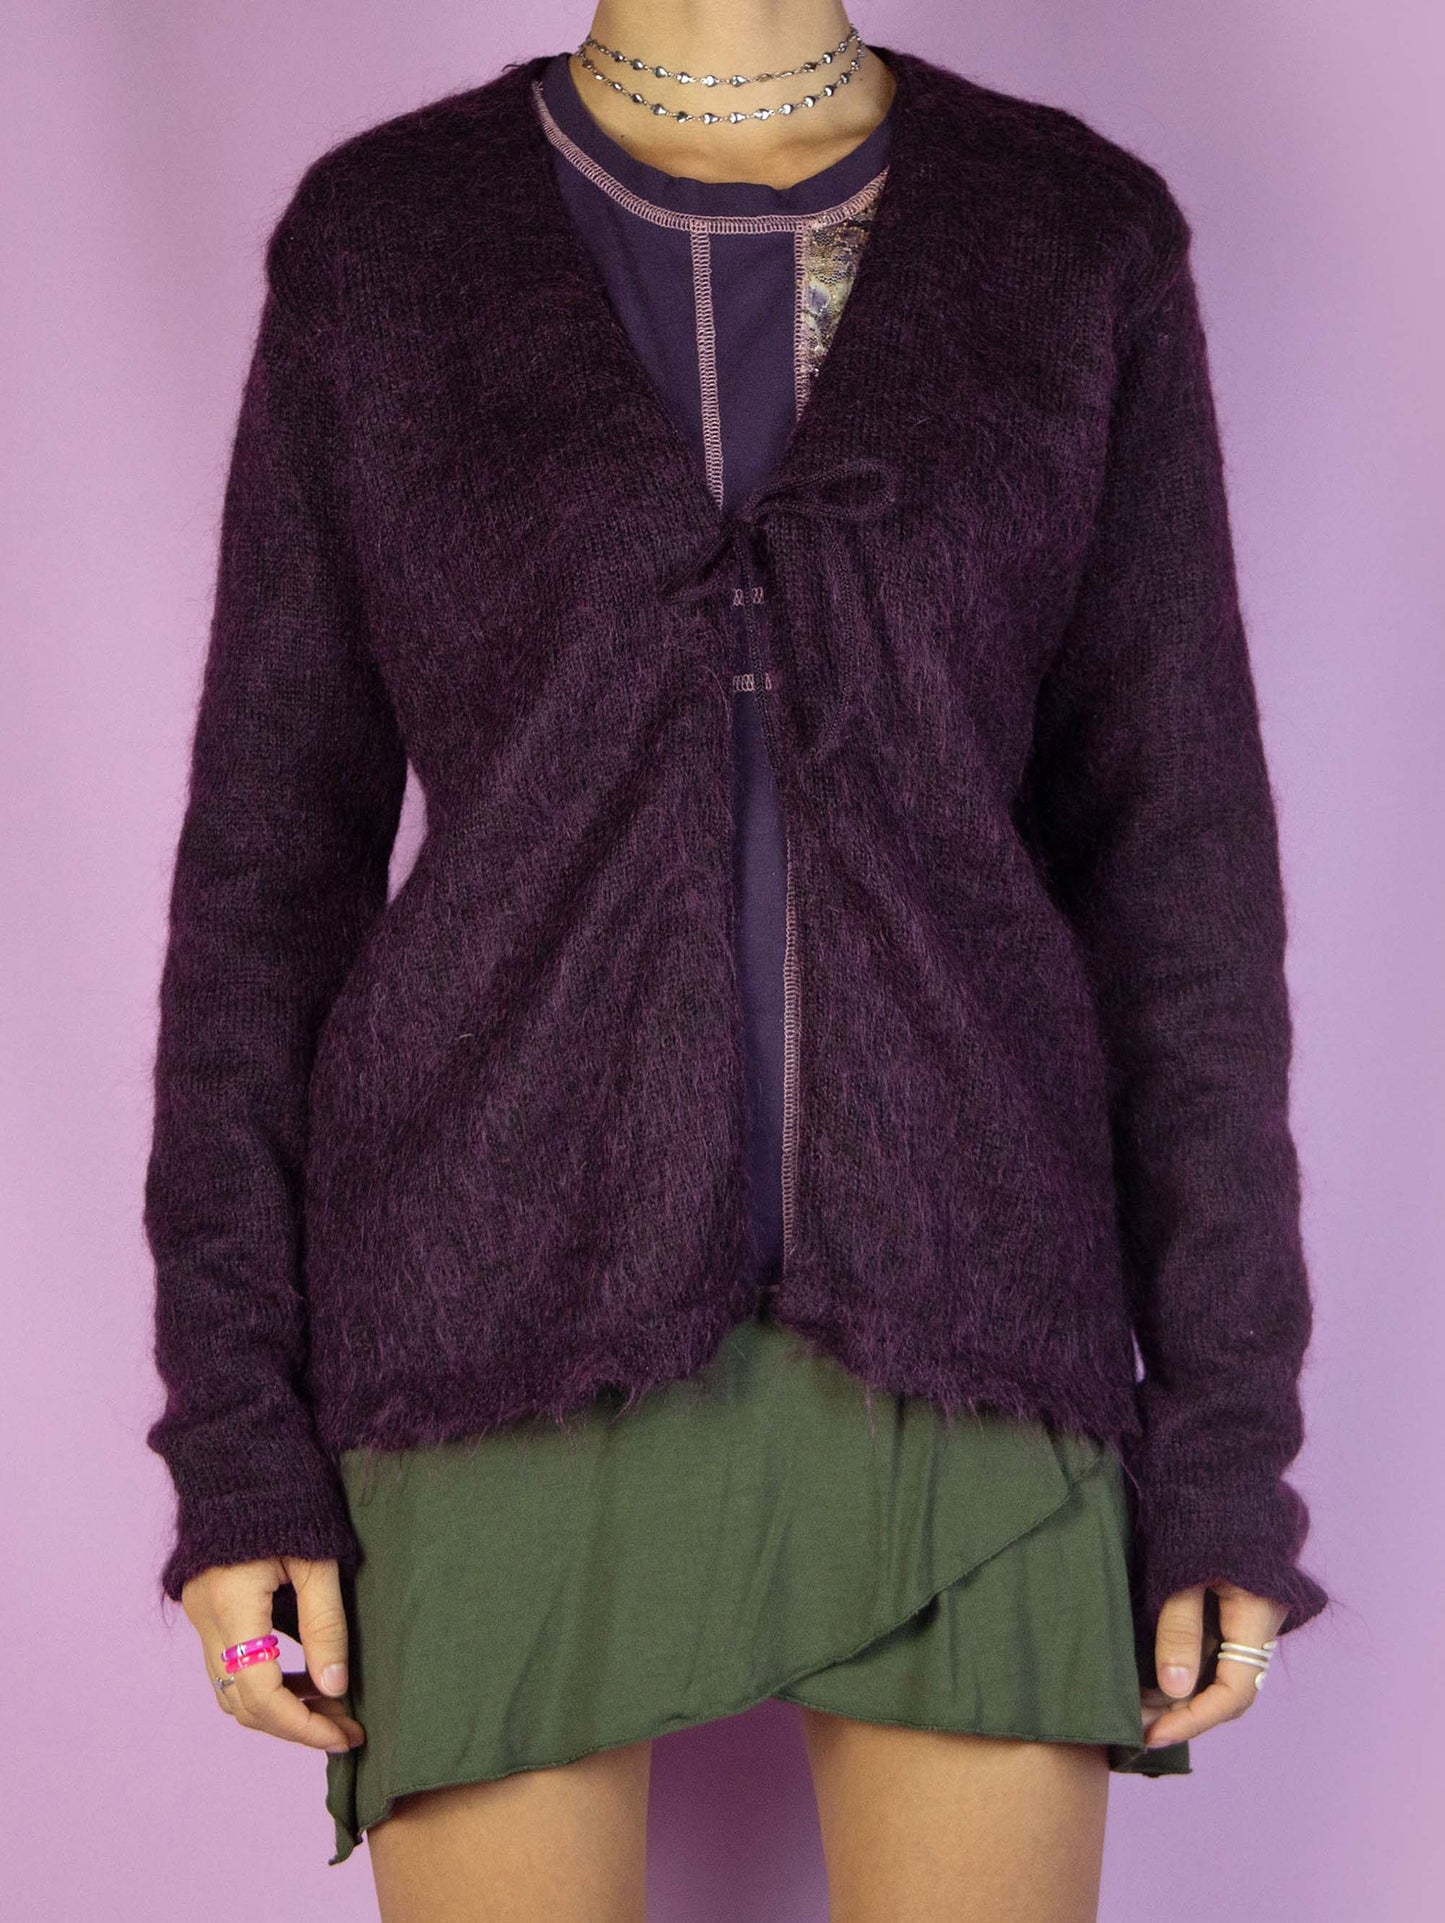 The Y2K Purple Tie Front Cardigan is a vintage 2000s dark purple mohair blend knit cardigan sweater featuring a tied front.